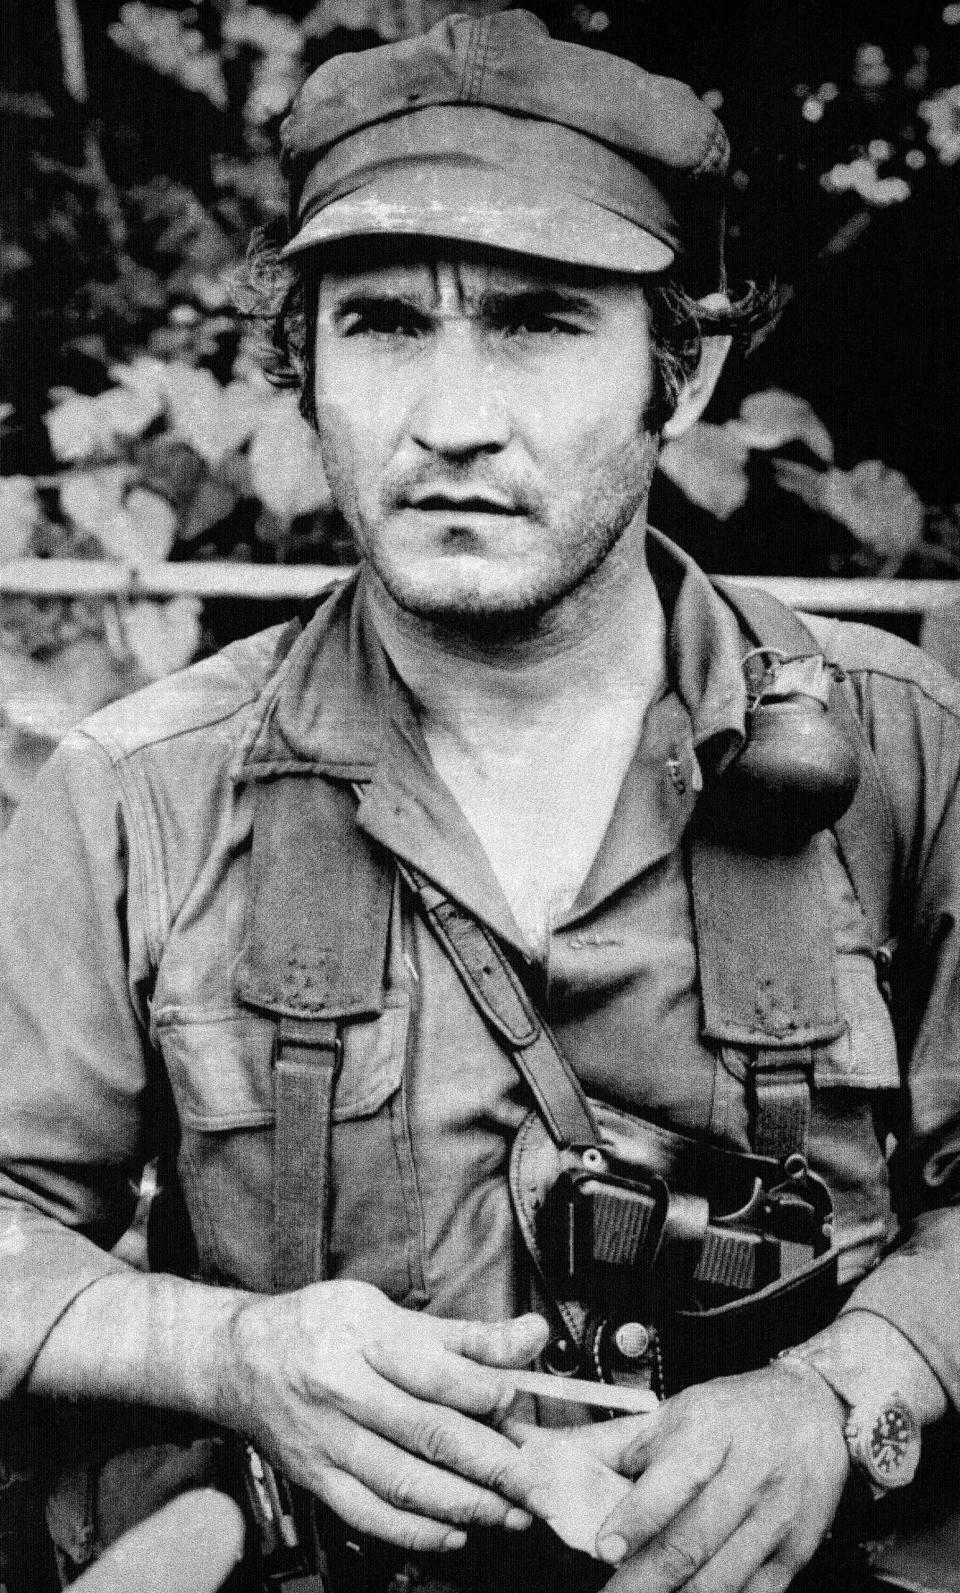 FILE - In this July 17, 1979 file photo, Eden Pastora, better known as "Comandante Zero" speaks to reporters after learning of President Somoza's resignation and flight out of Nicaragua. Pastora, one of the most mercurial, charismatic figures of Central America’s revolutionary upheavals, has died. His son Alvaro Pastora said Tuesday, June 16, 2020, that he died at Managua’s Military Hospital of respiratory failure. (AP Photo/Laverne Coleman, File)